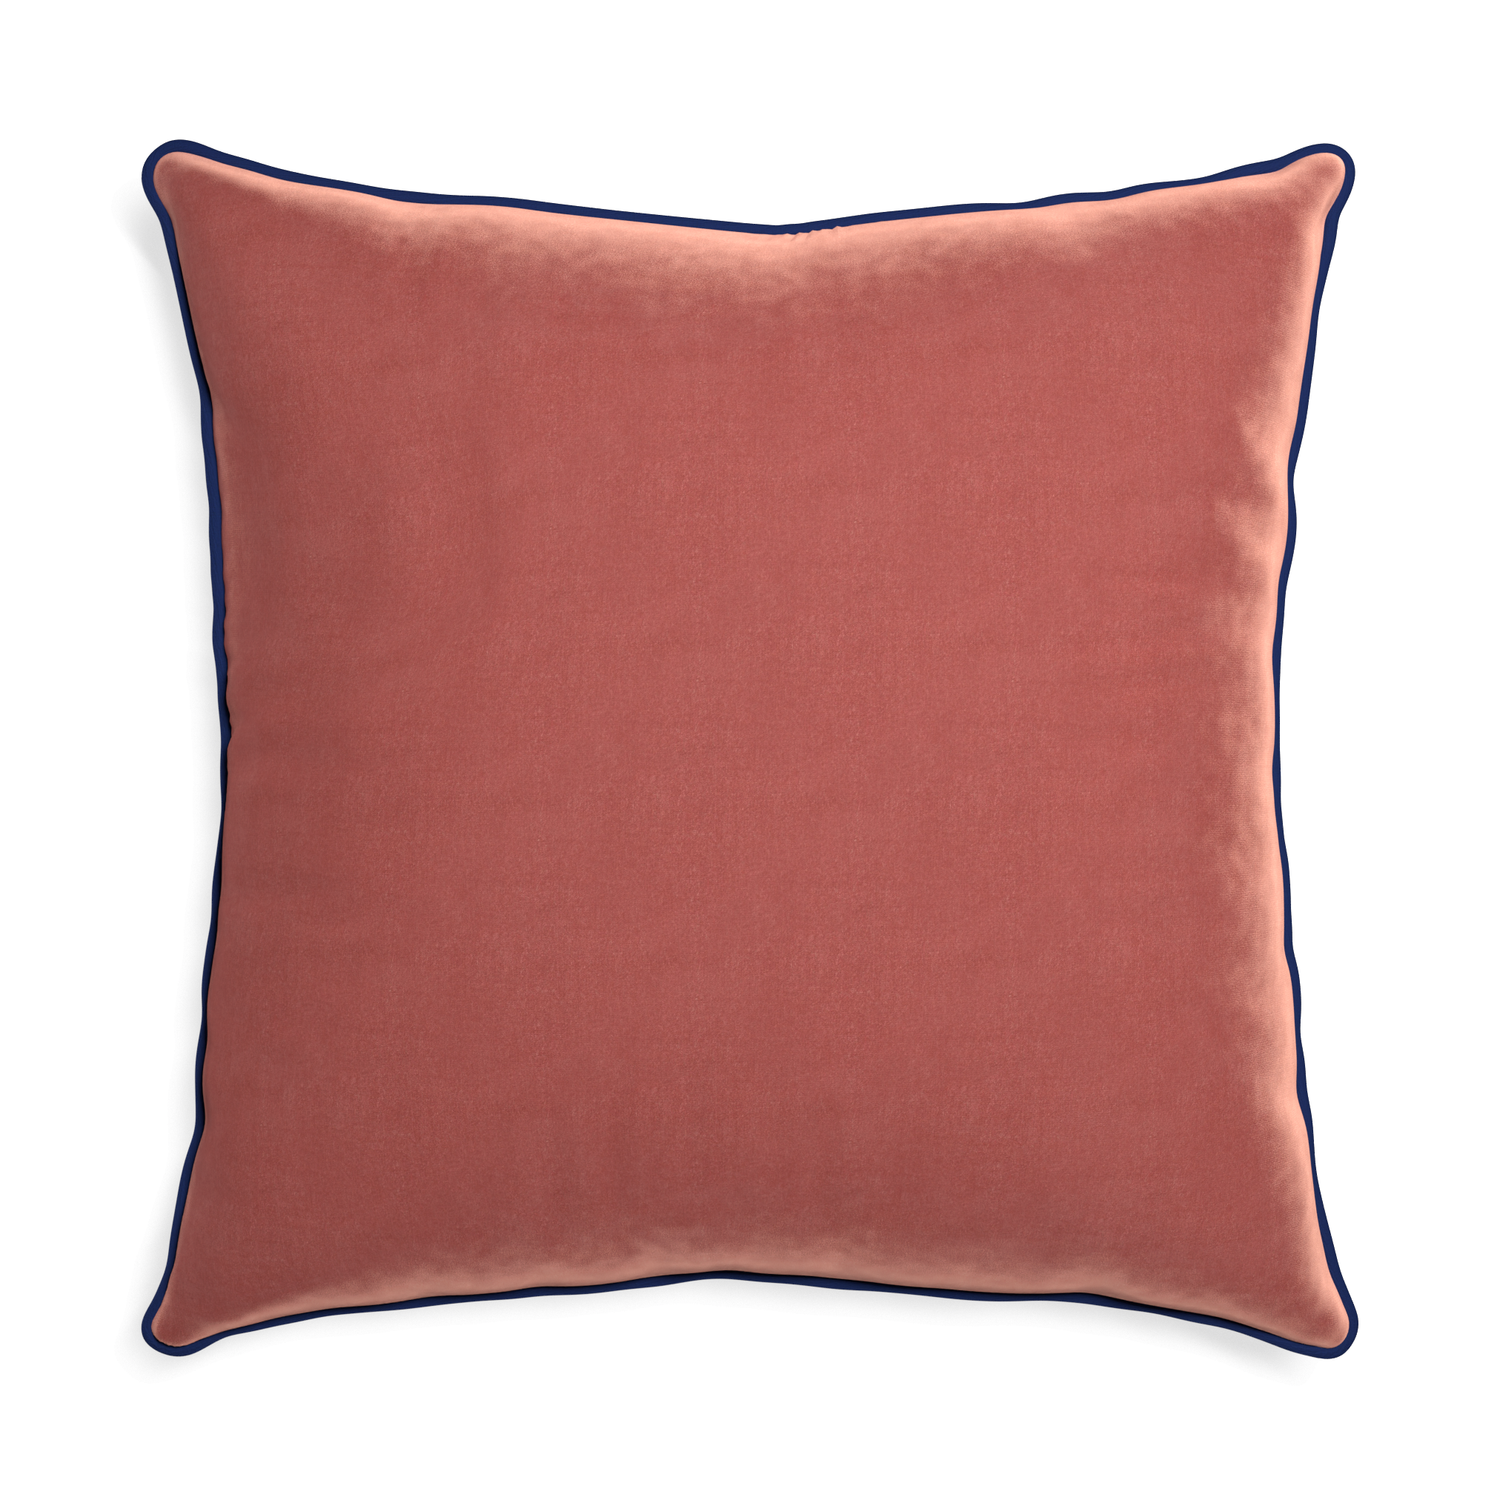 square coral velvet pillow with navy blue piping